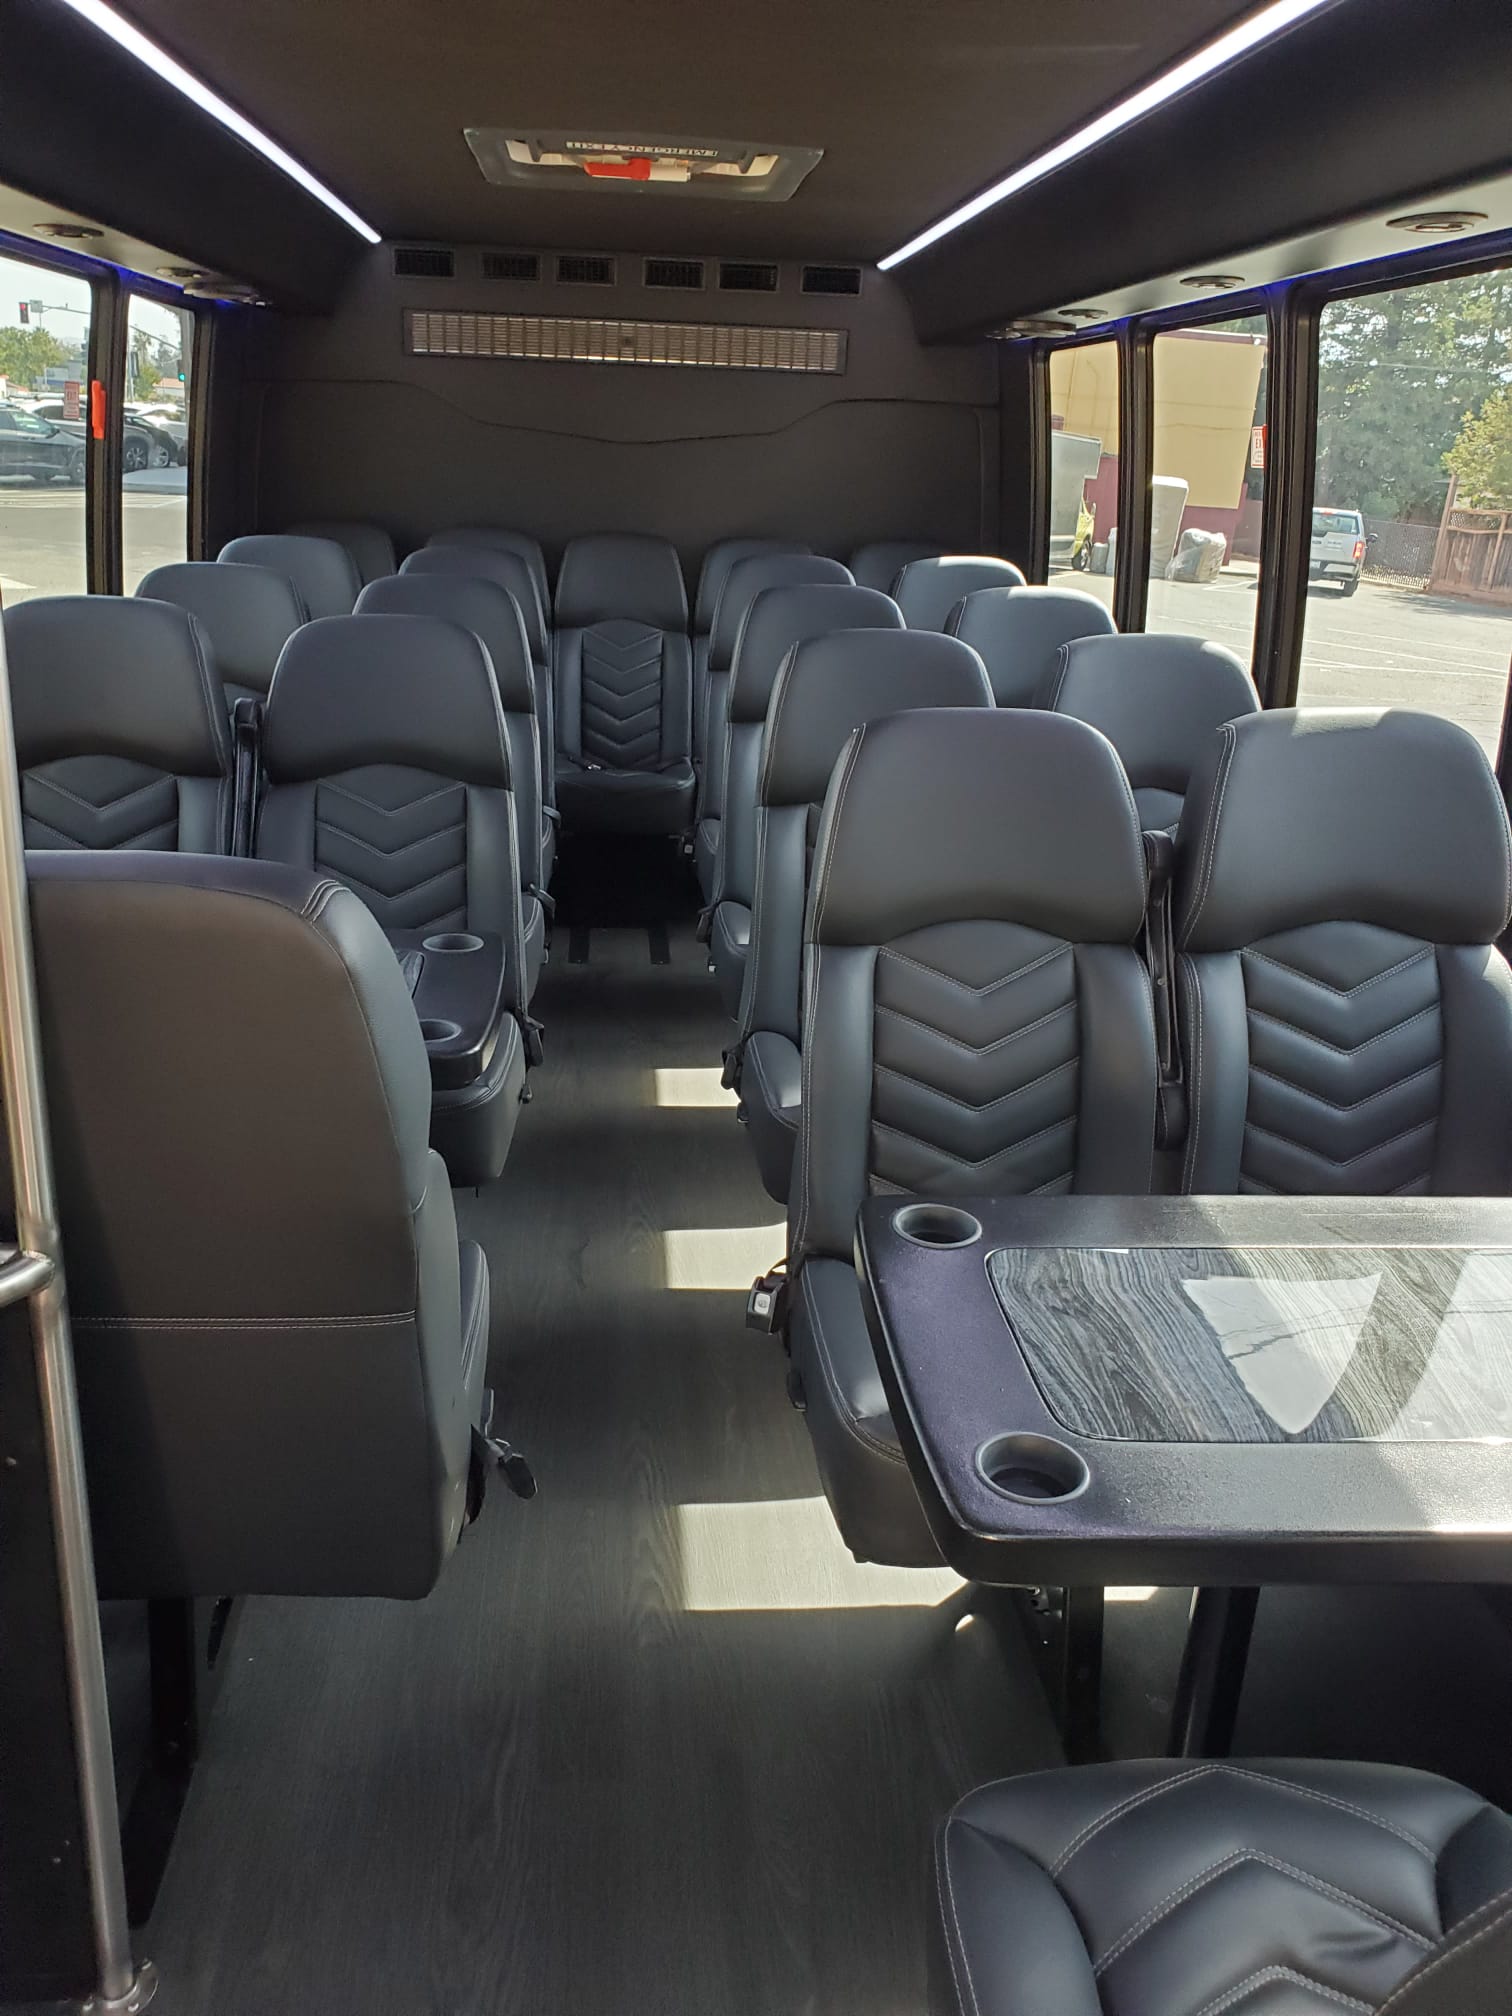 Shuttle Bus Interior for Corporate Needs